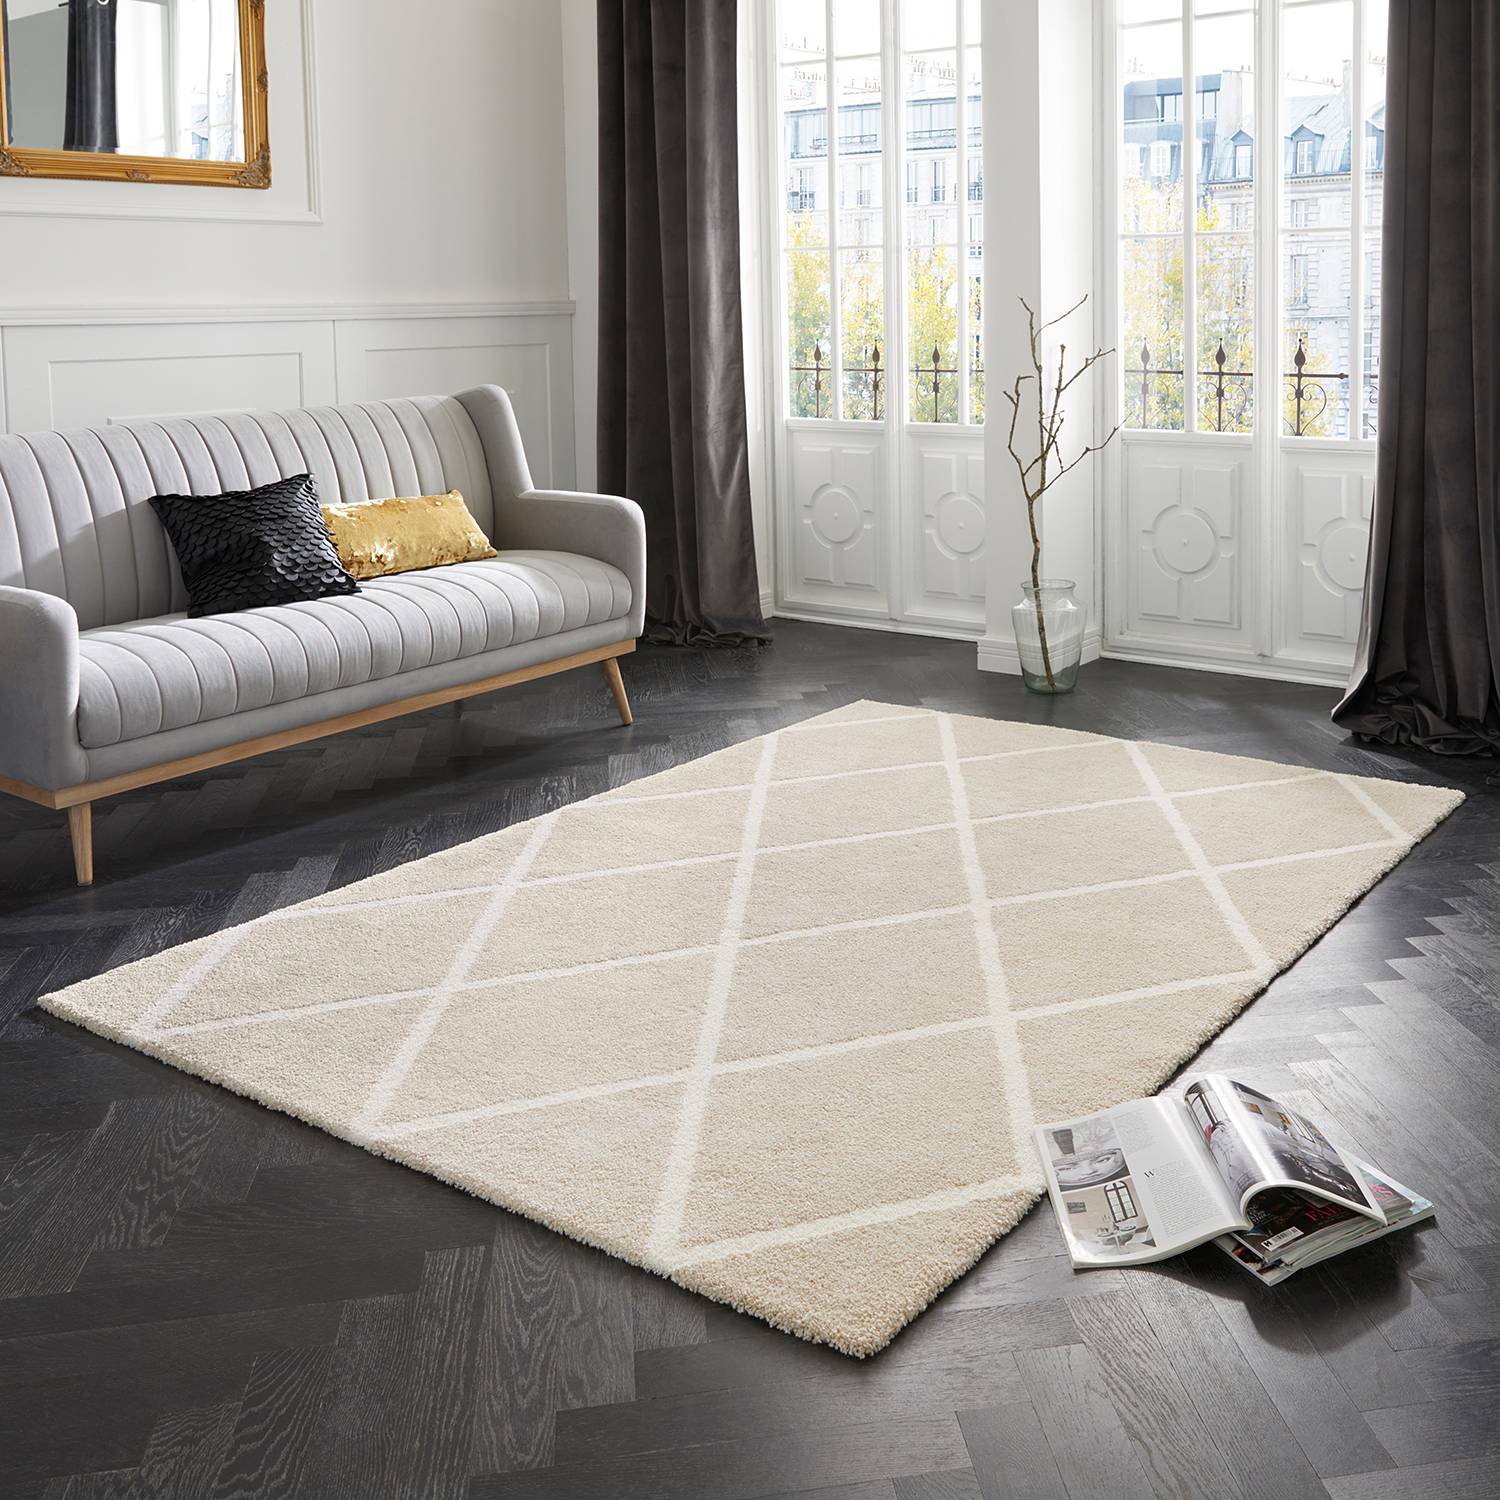 Image of Tapis Lunel 000000001000167777